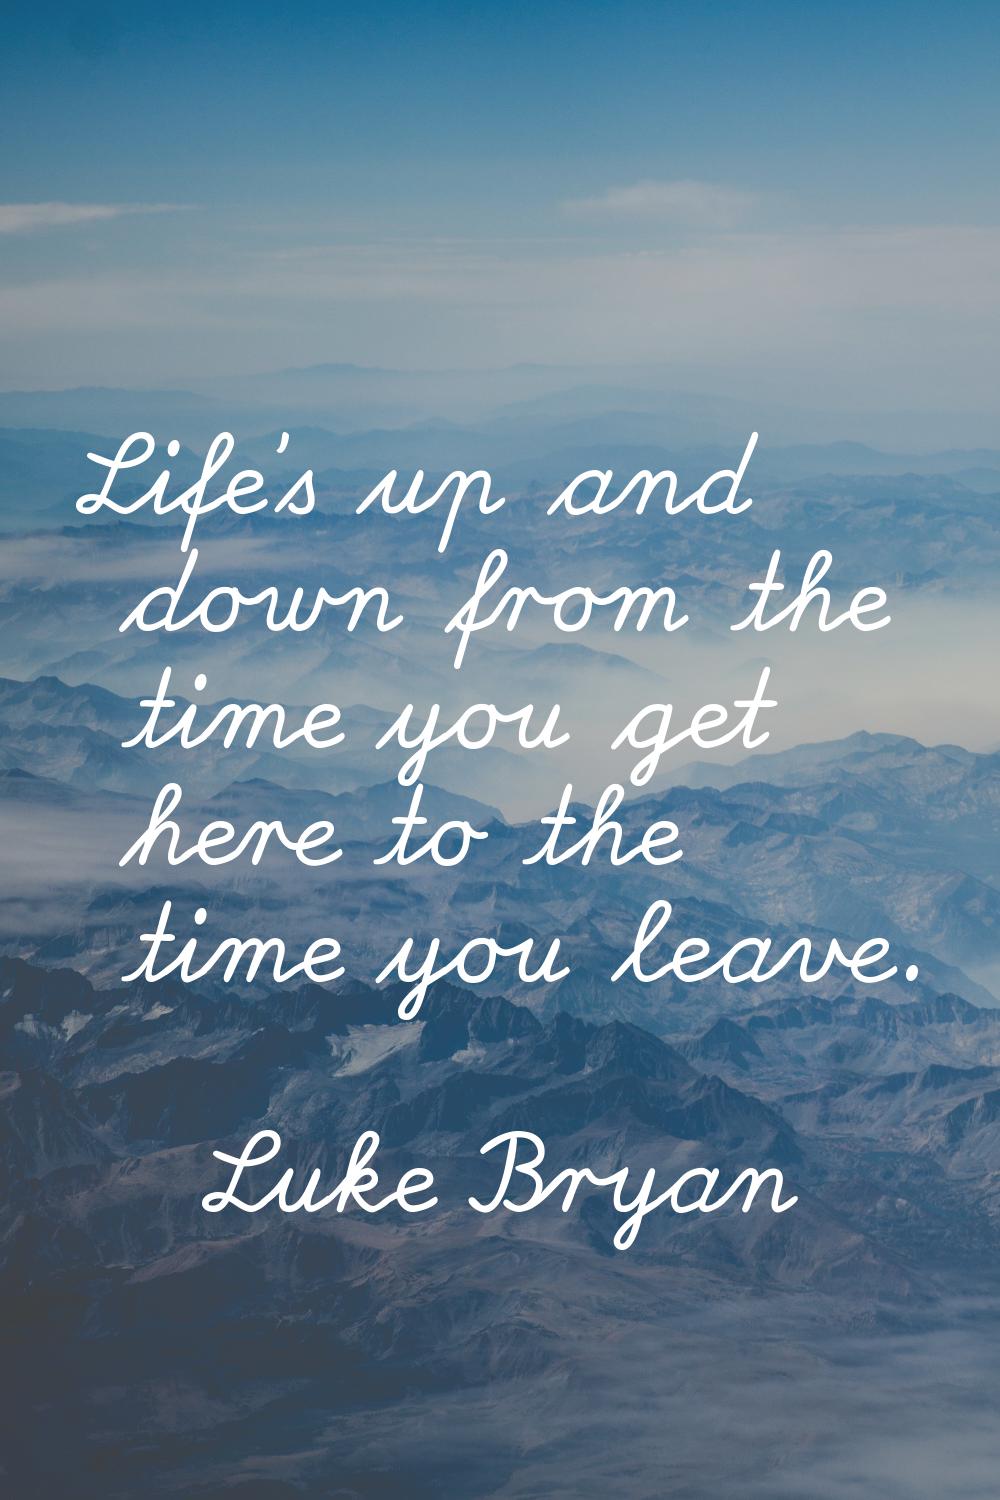 Life's up and down from the time you get here to the time you leave.